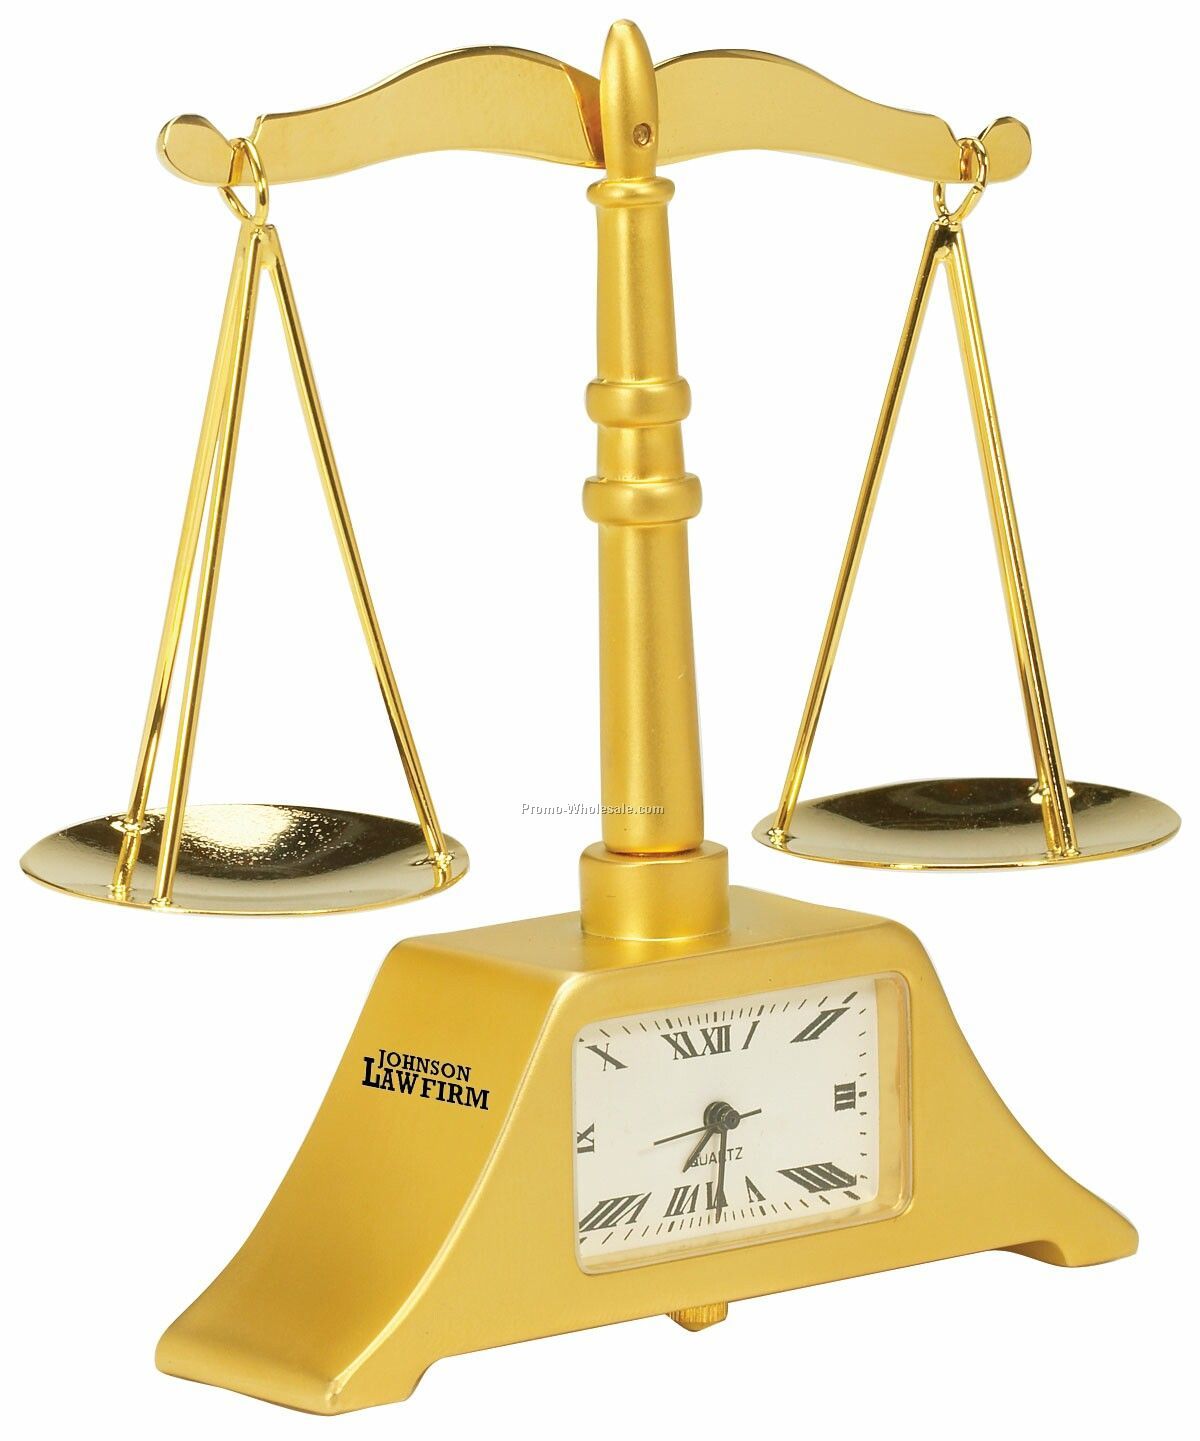 Die Cast Scale Of Justice Clock